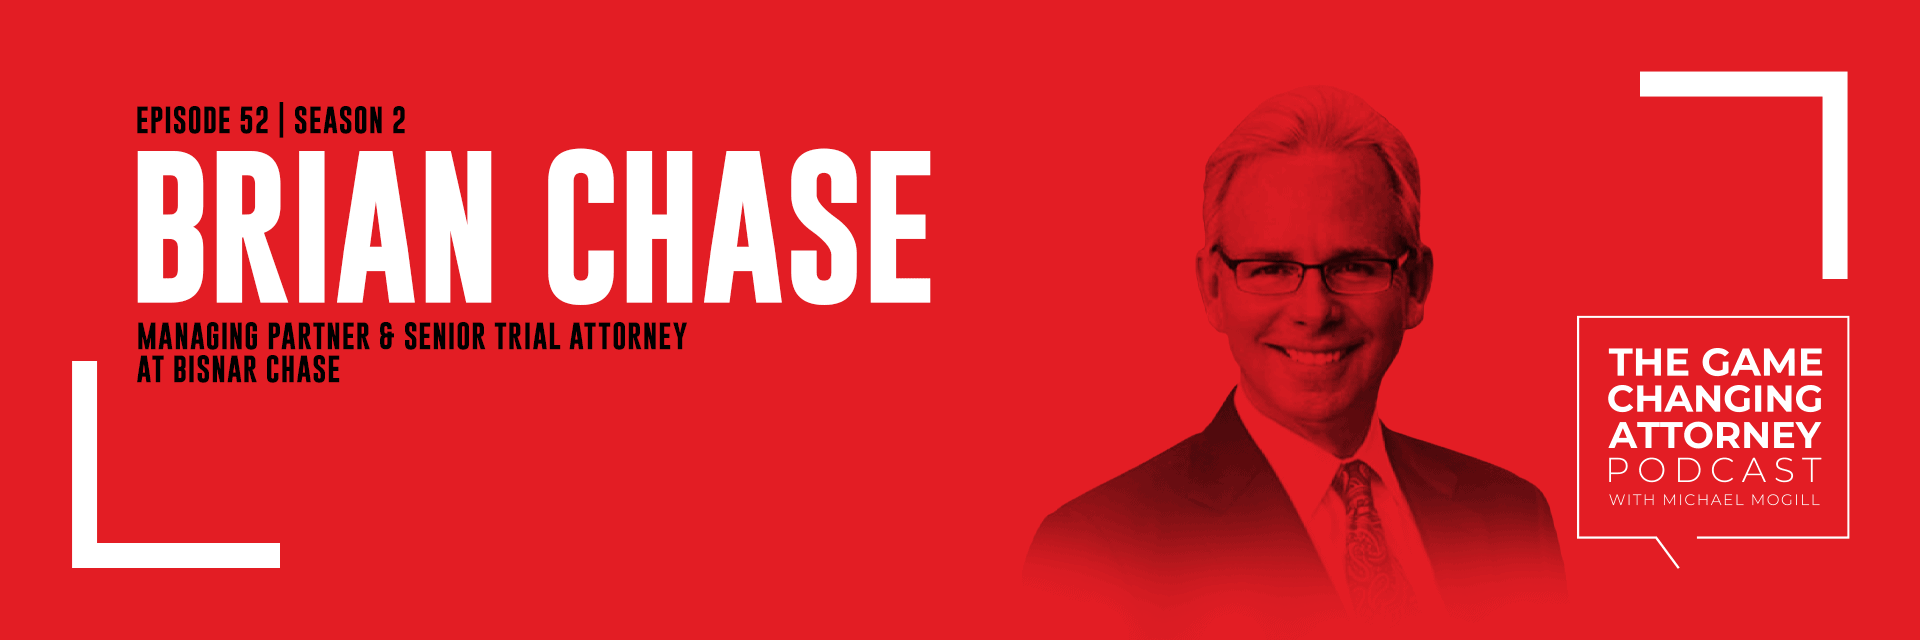 Brian Chase - The Game Changing Attorney Podcast - Desktop